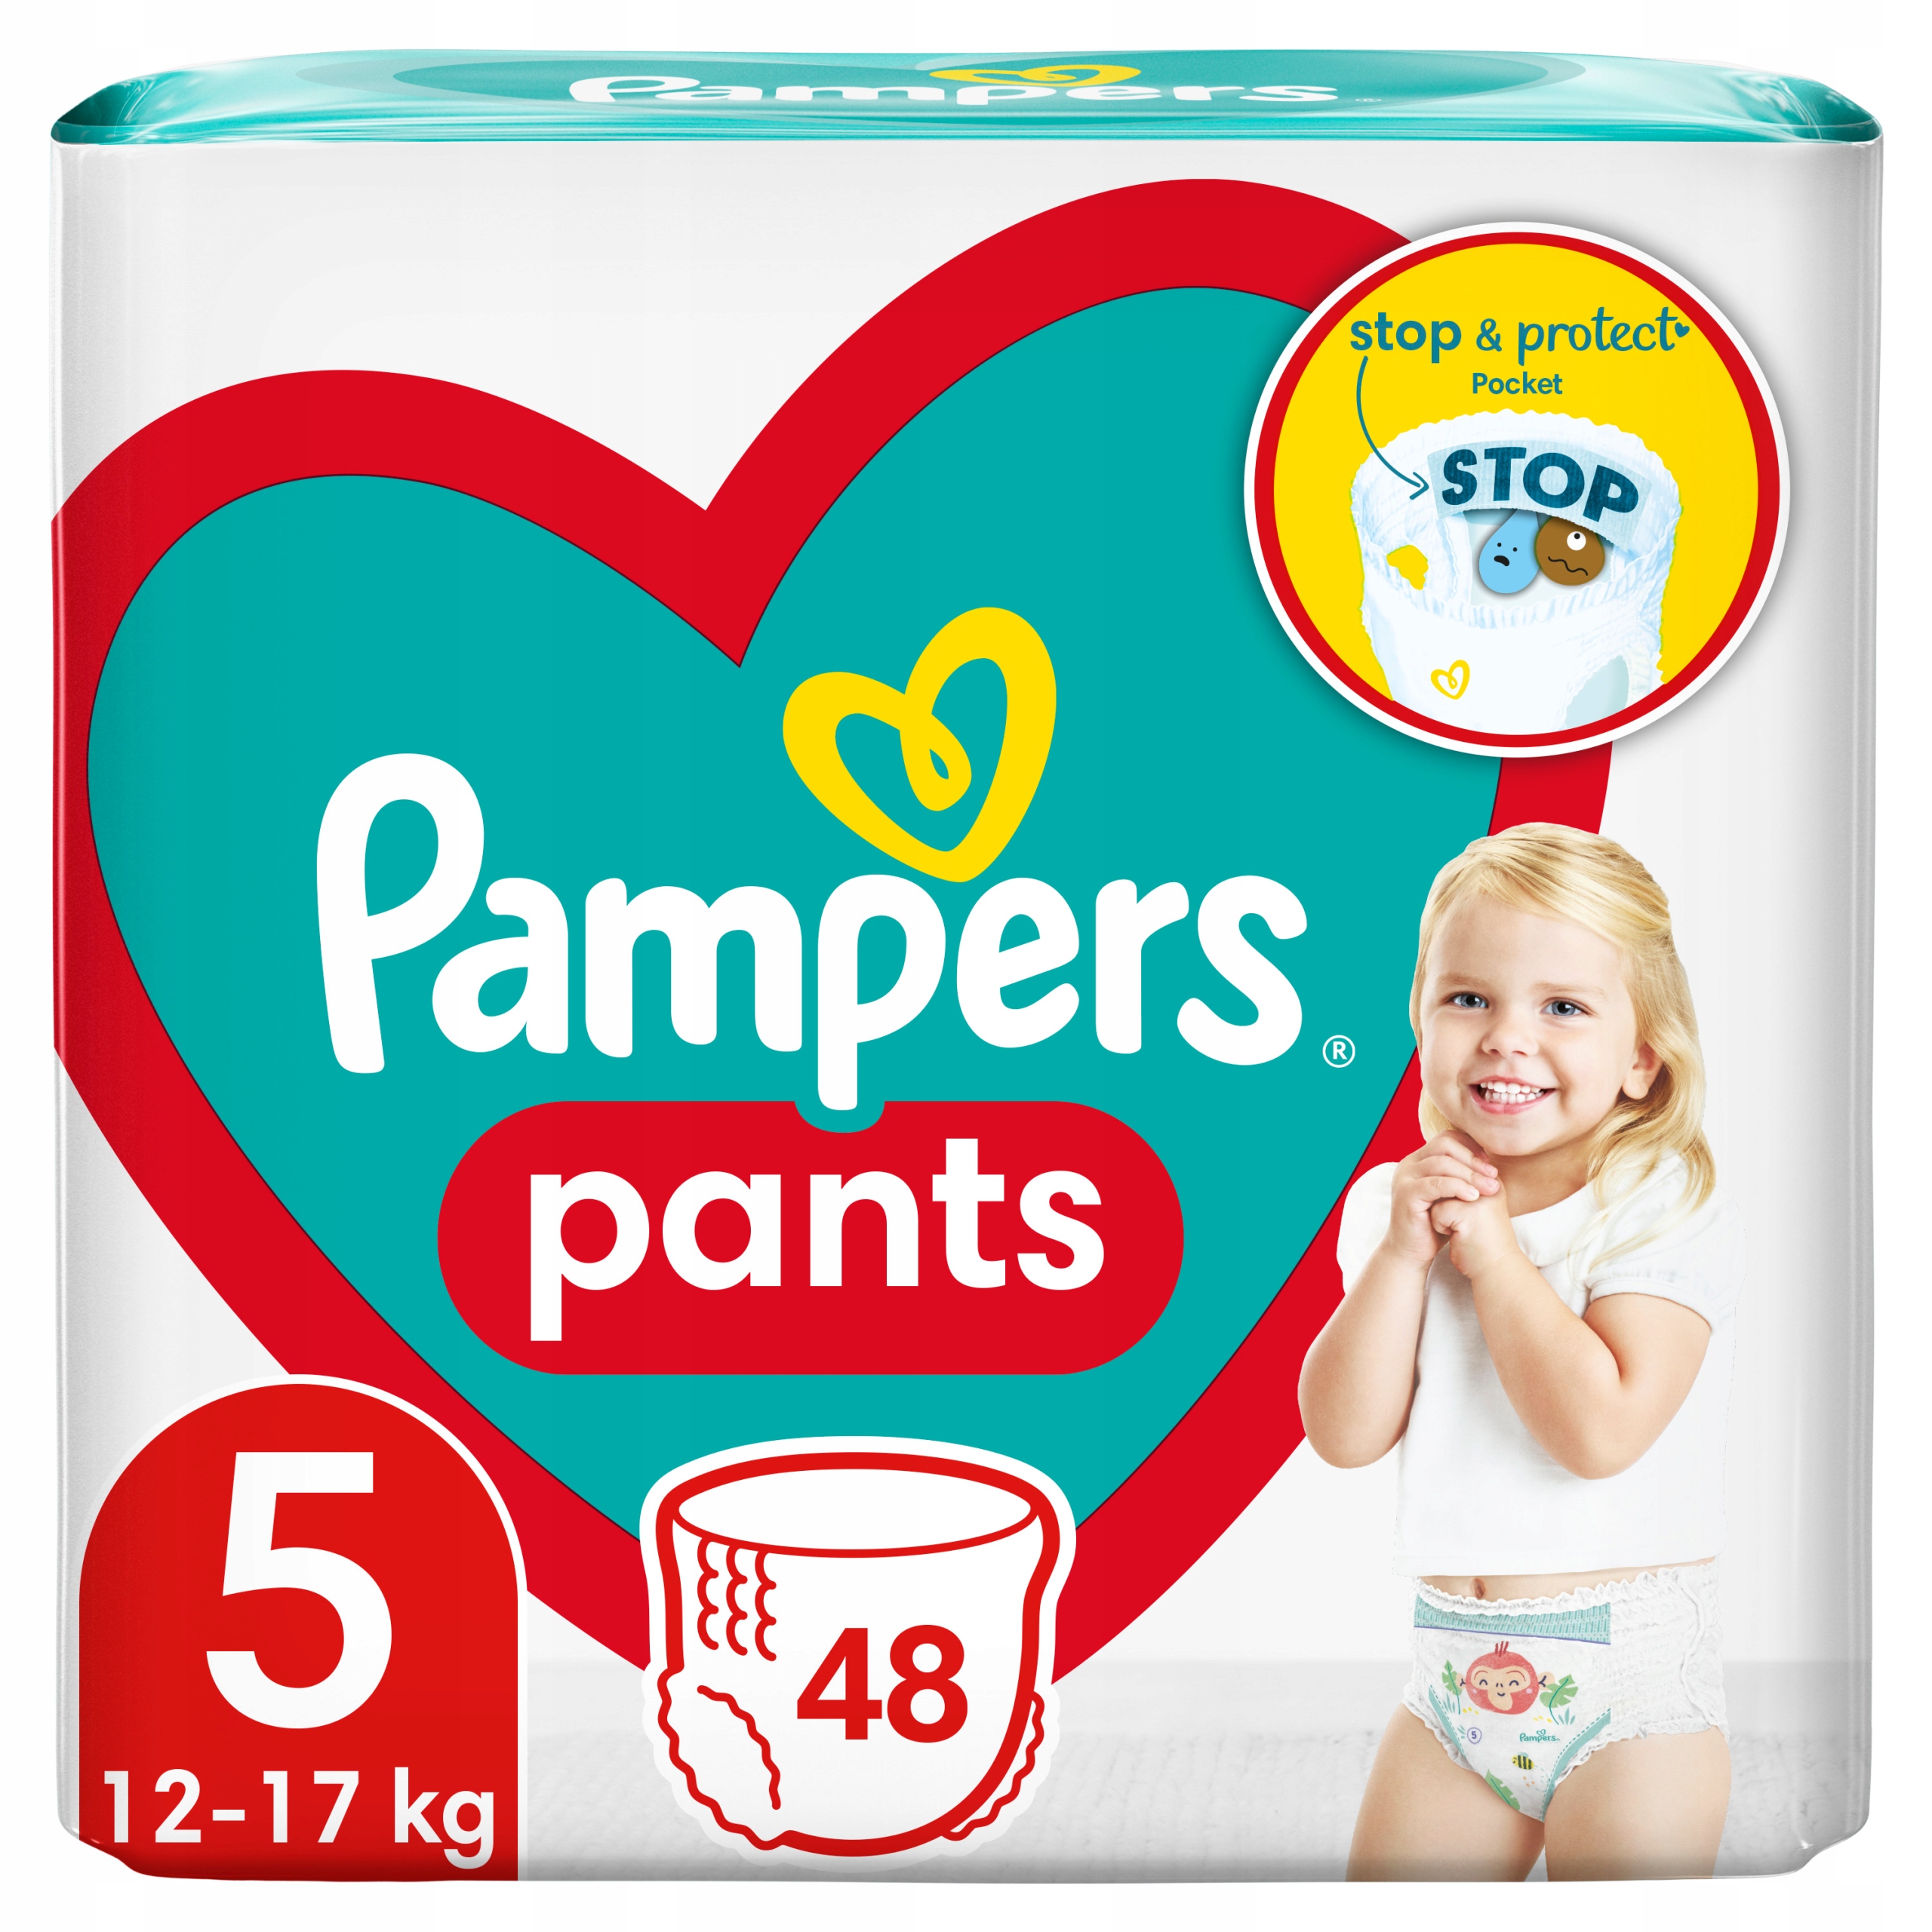 roznica pampers a pampers premium